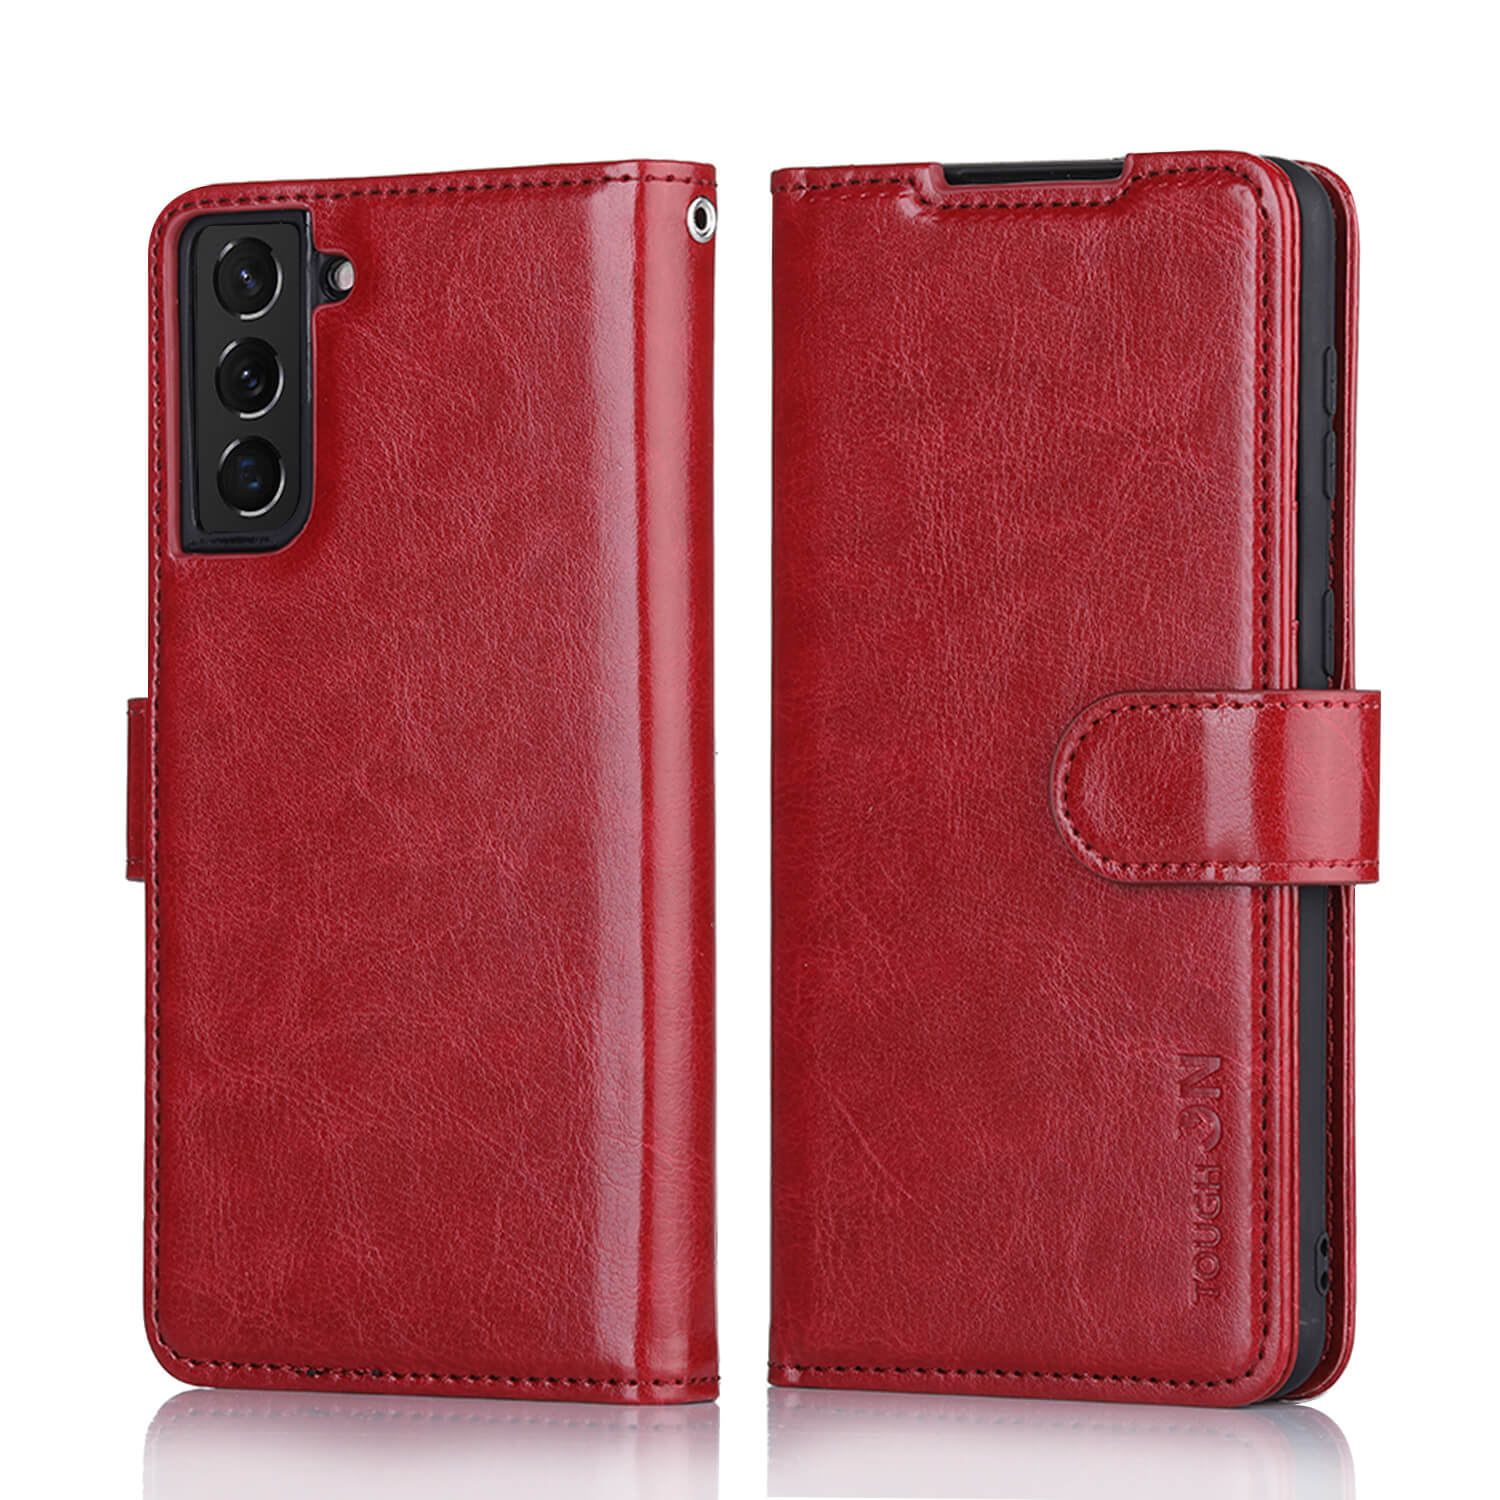 Tough On Samsung Galaxy S22 Plus 5G Flip Wallet Leather Case Red